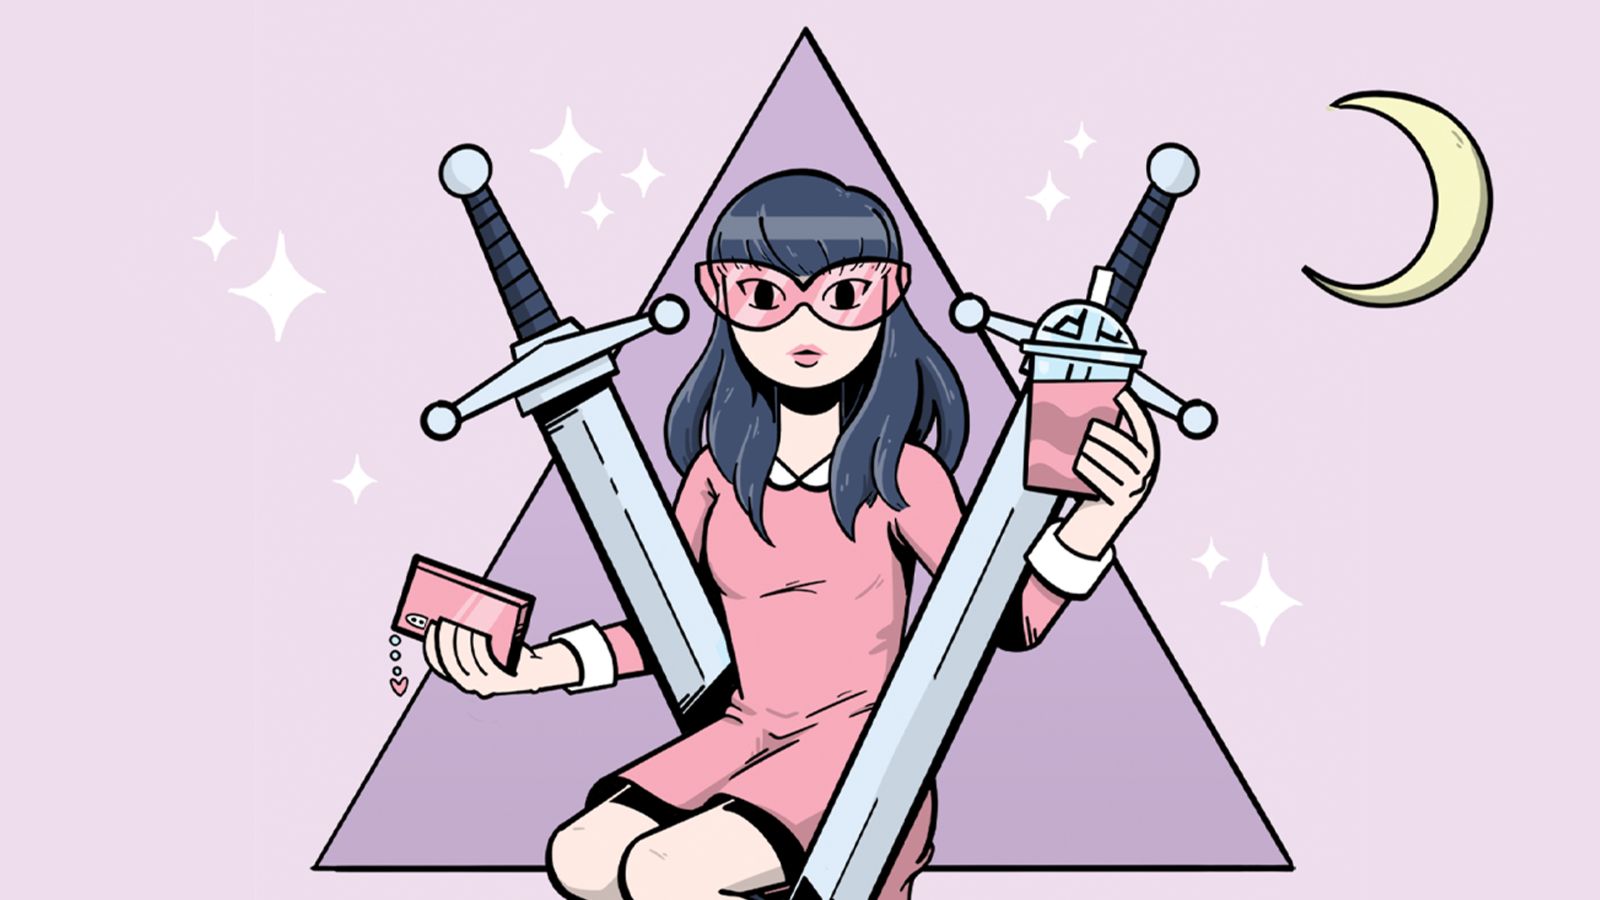 A female character with pink glasses holds bubble tea and two large swords